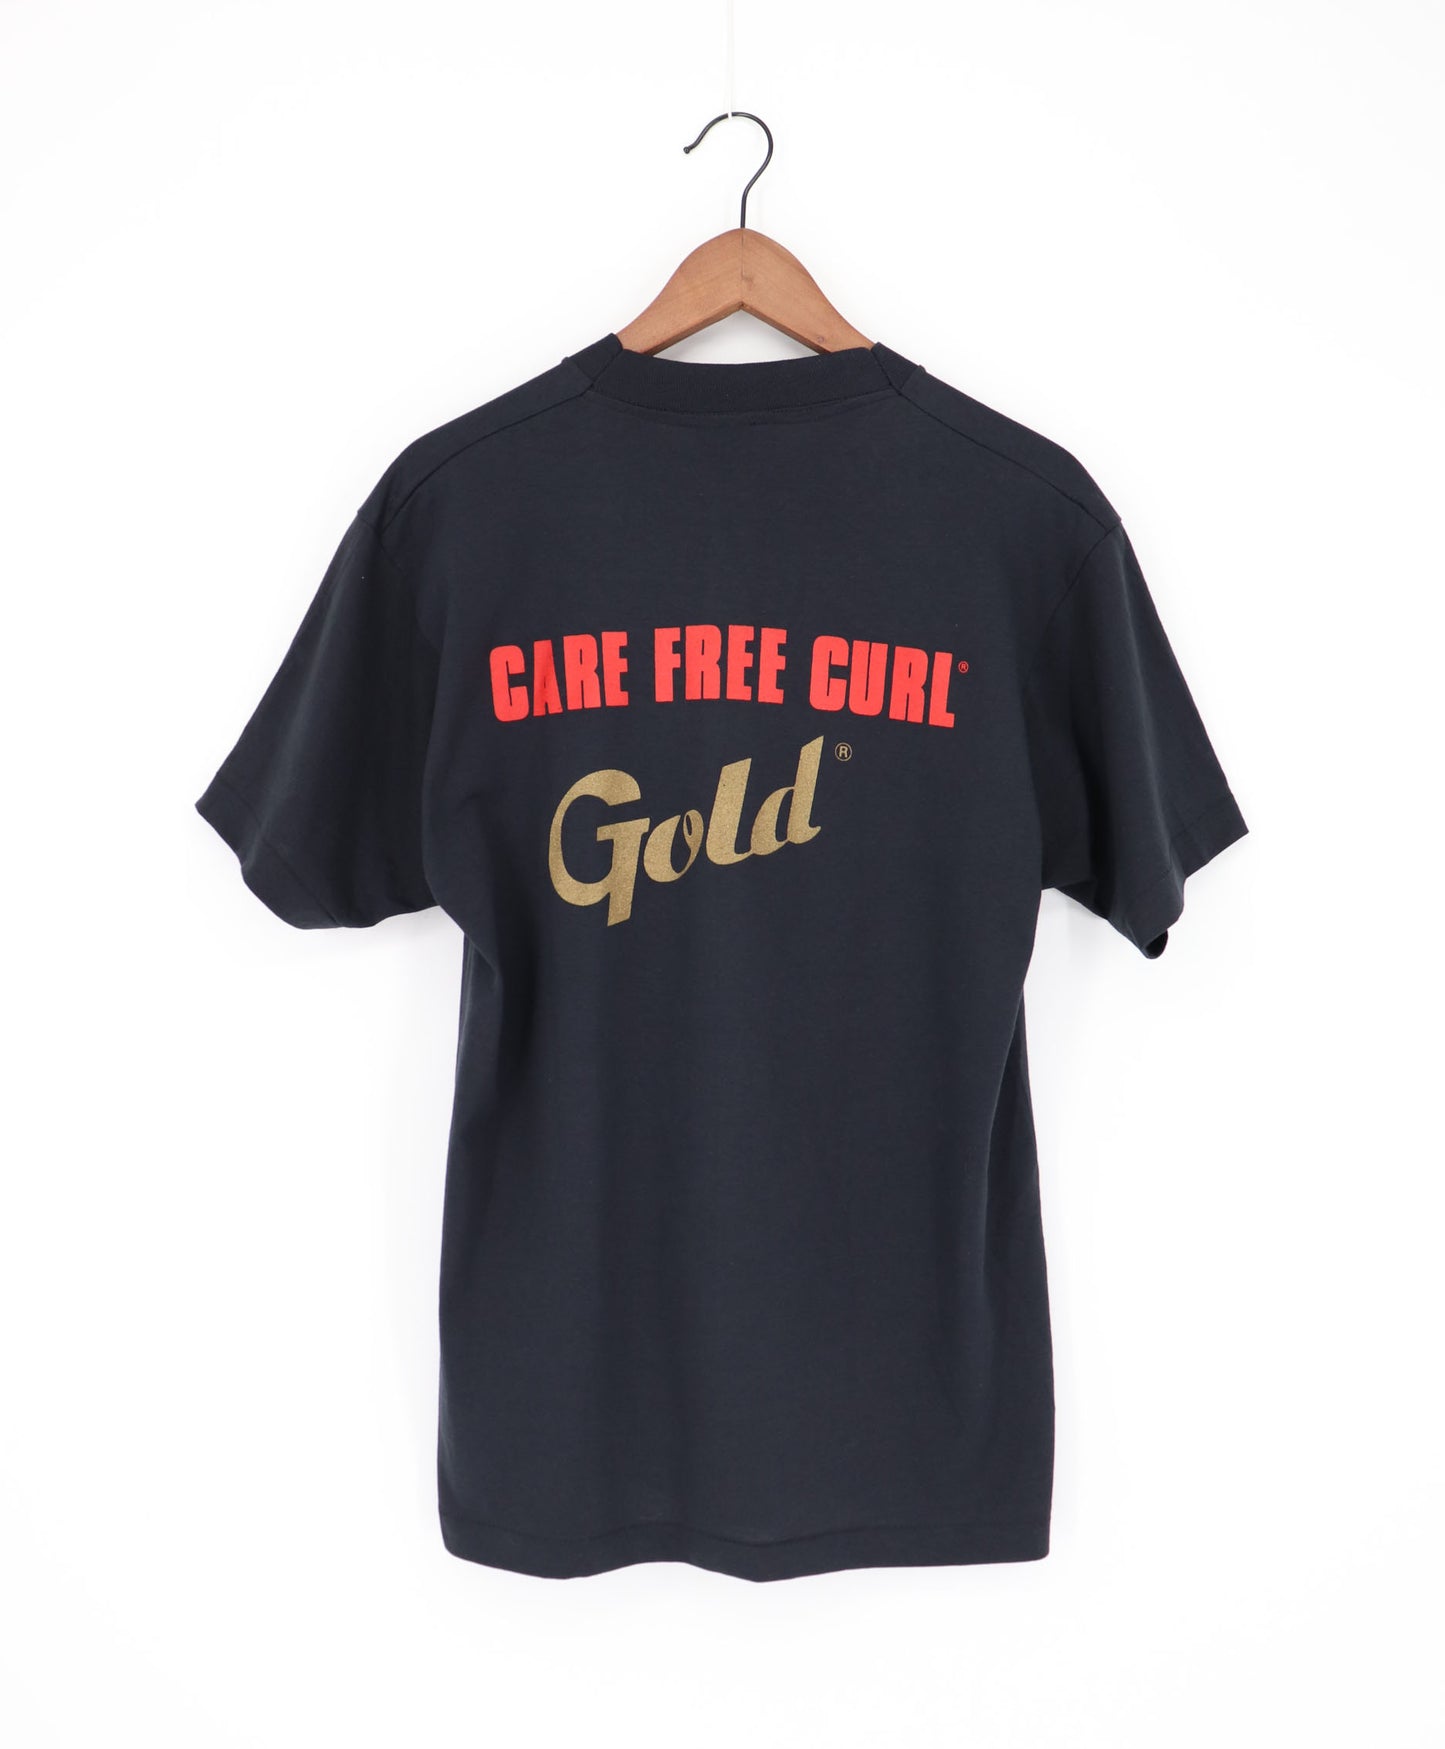 VINTAGE CARE FREE CURL GOLD N' DRI MADE IN USA